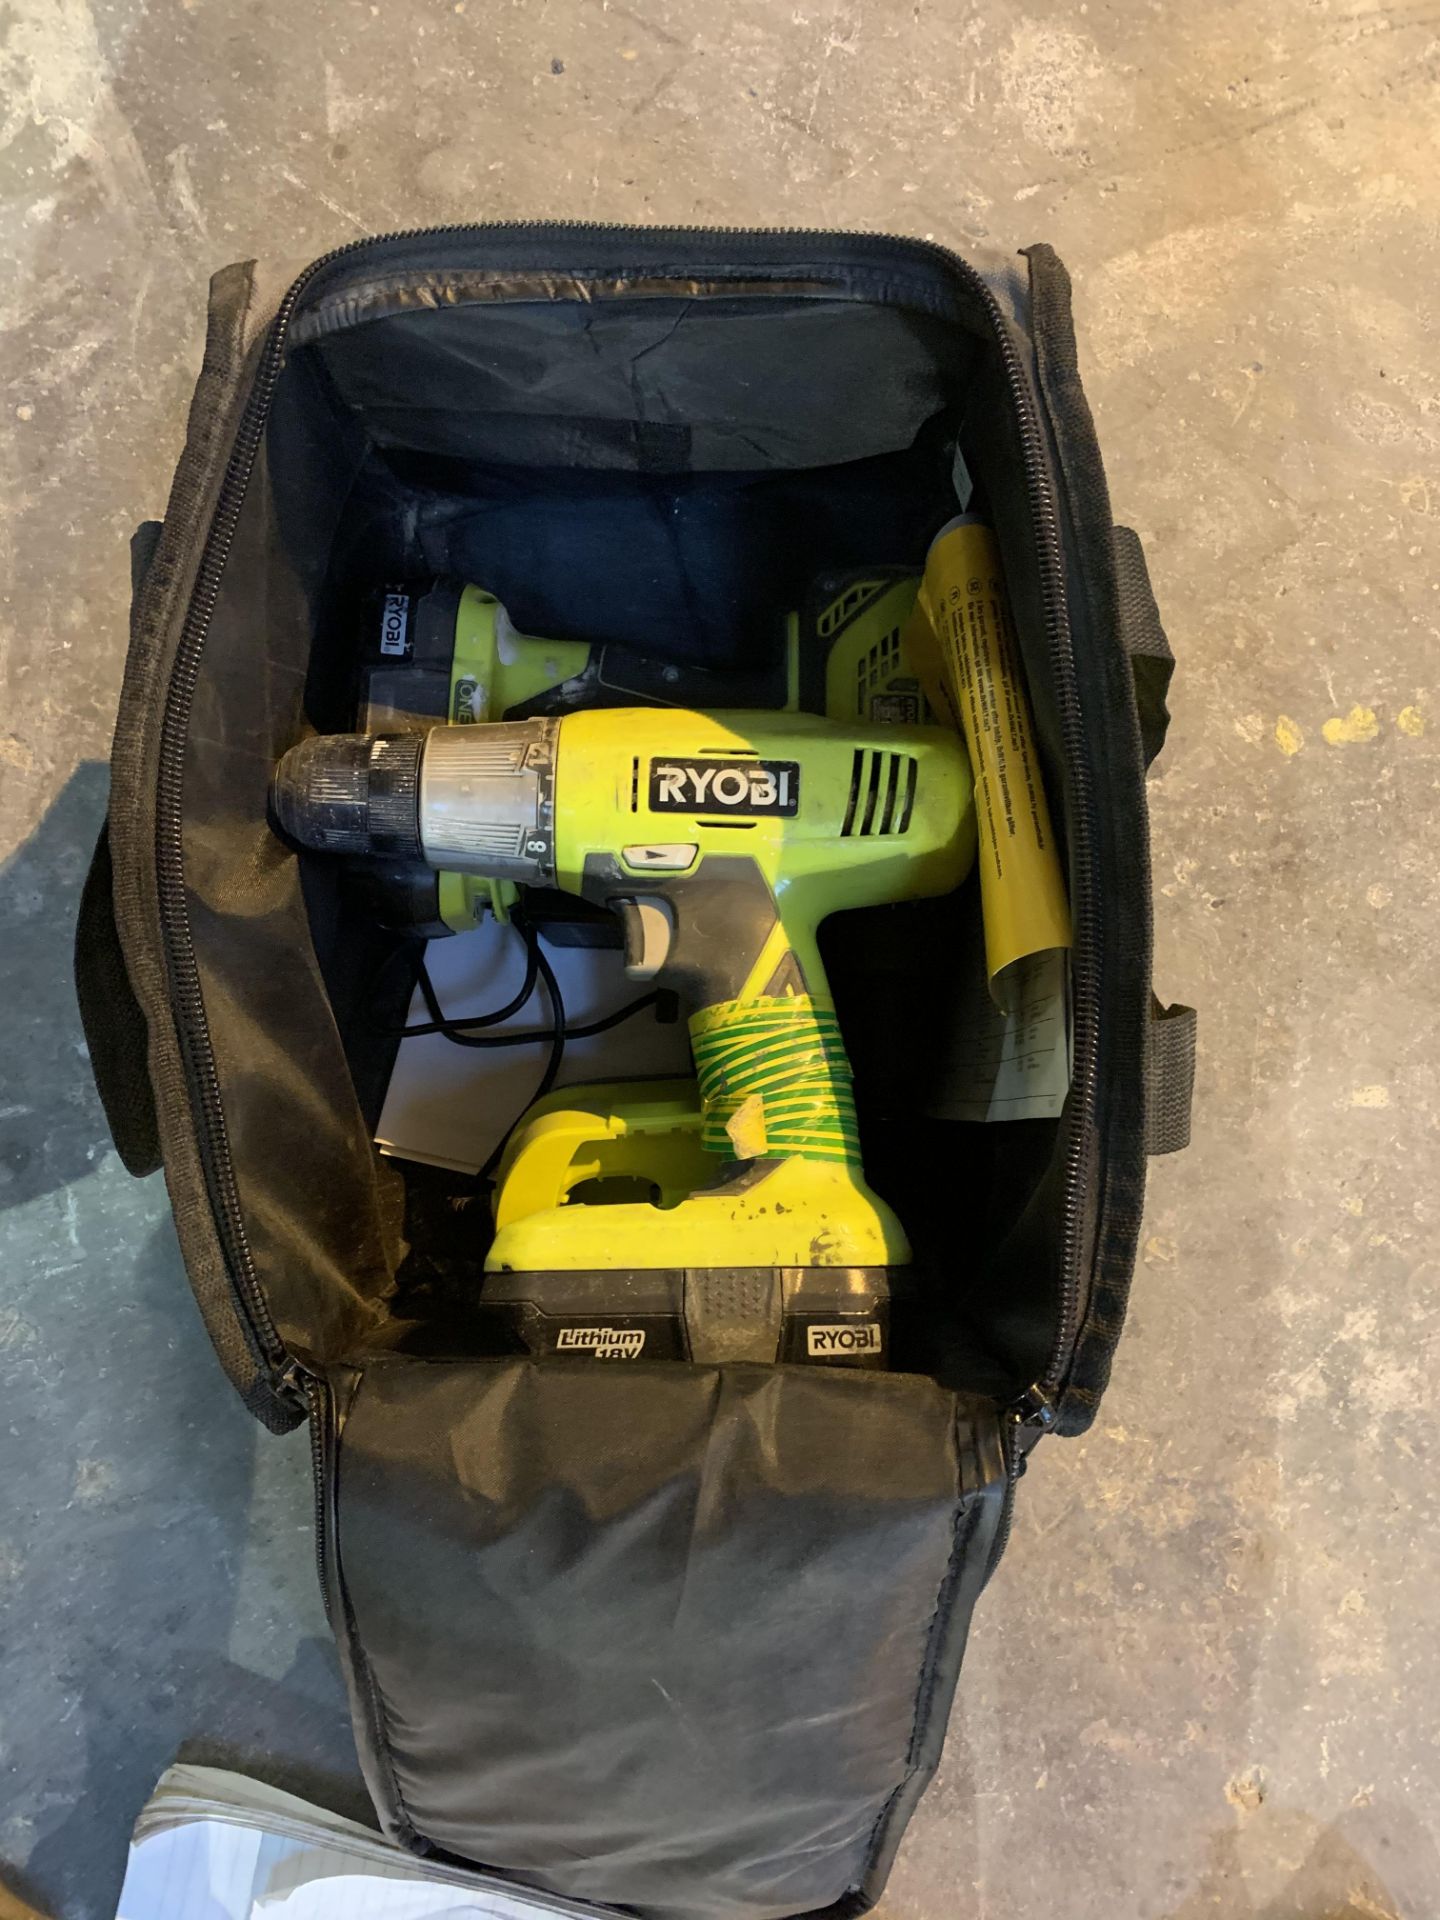 Ryobi - 1 x R18DDP2 1 x R18PD3 Batttery Hand Drill with Case and Charger